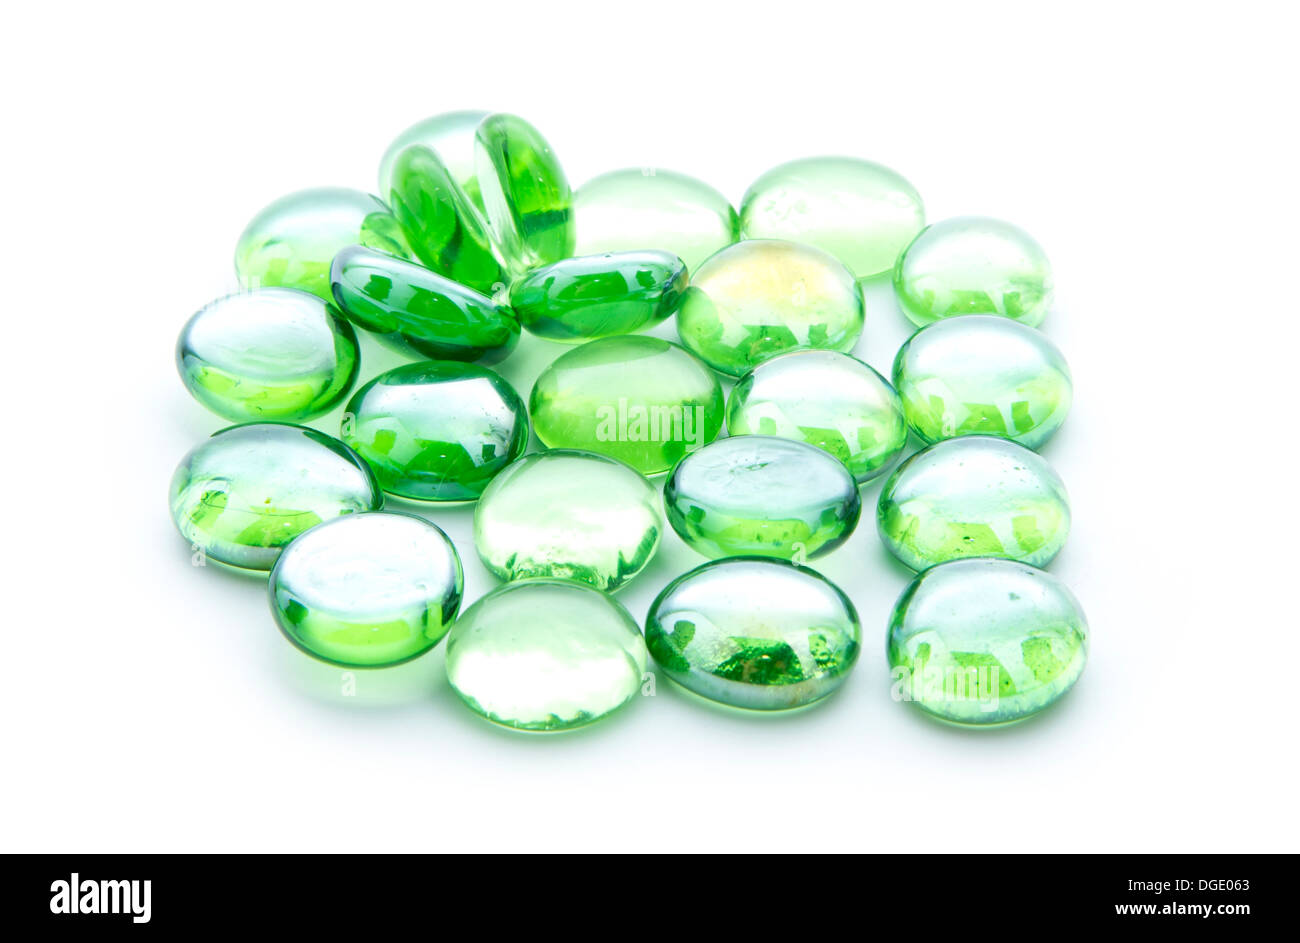 green glass beads isolated on white background Stock Photo